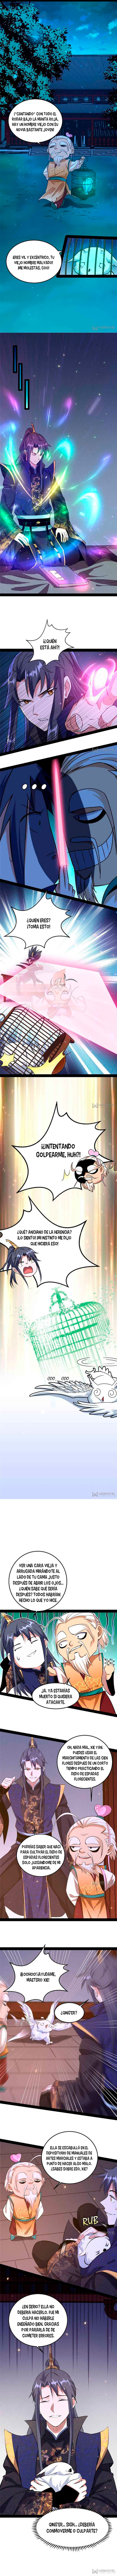 Manga Soy un dios maligno Chapter 86 image number 2